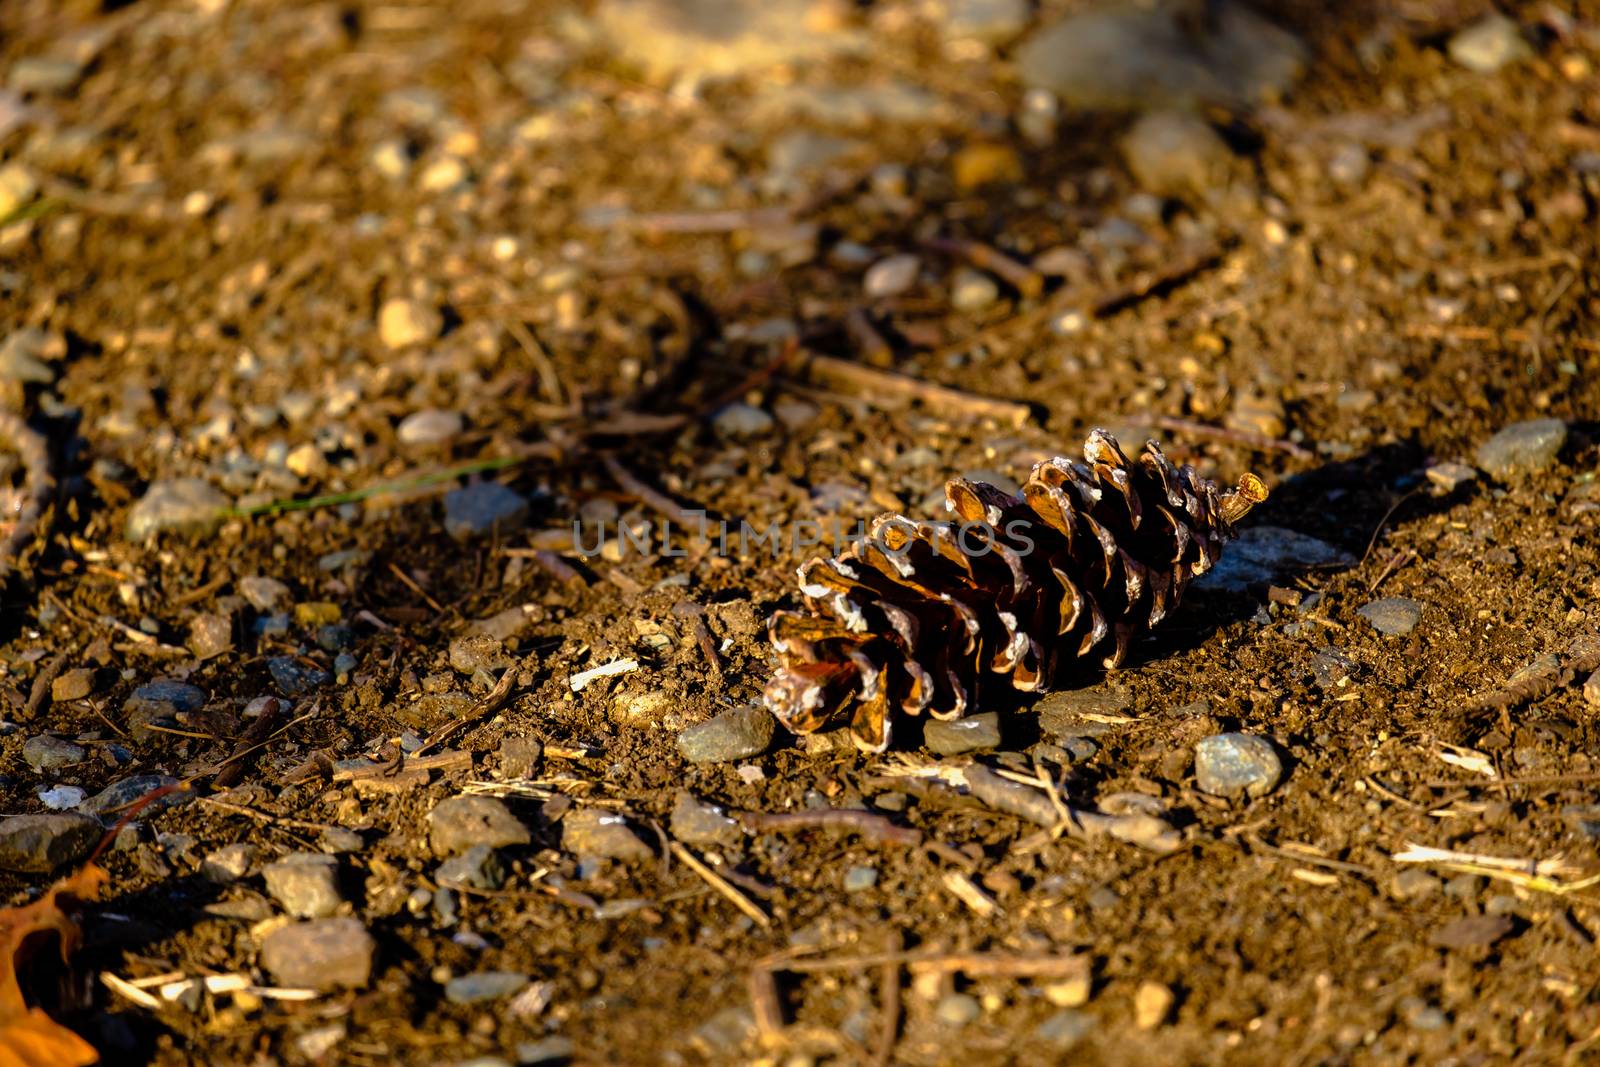 A pine cone, fallen from a tree in autumn, lies on the ground among twigs, stones and dirt.